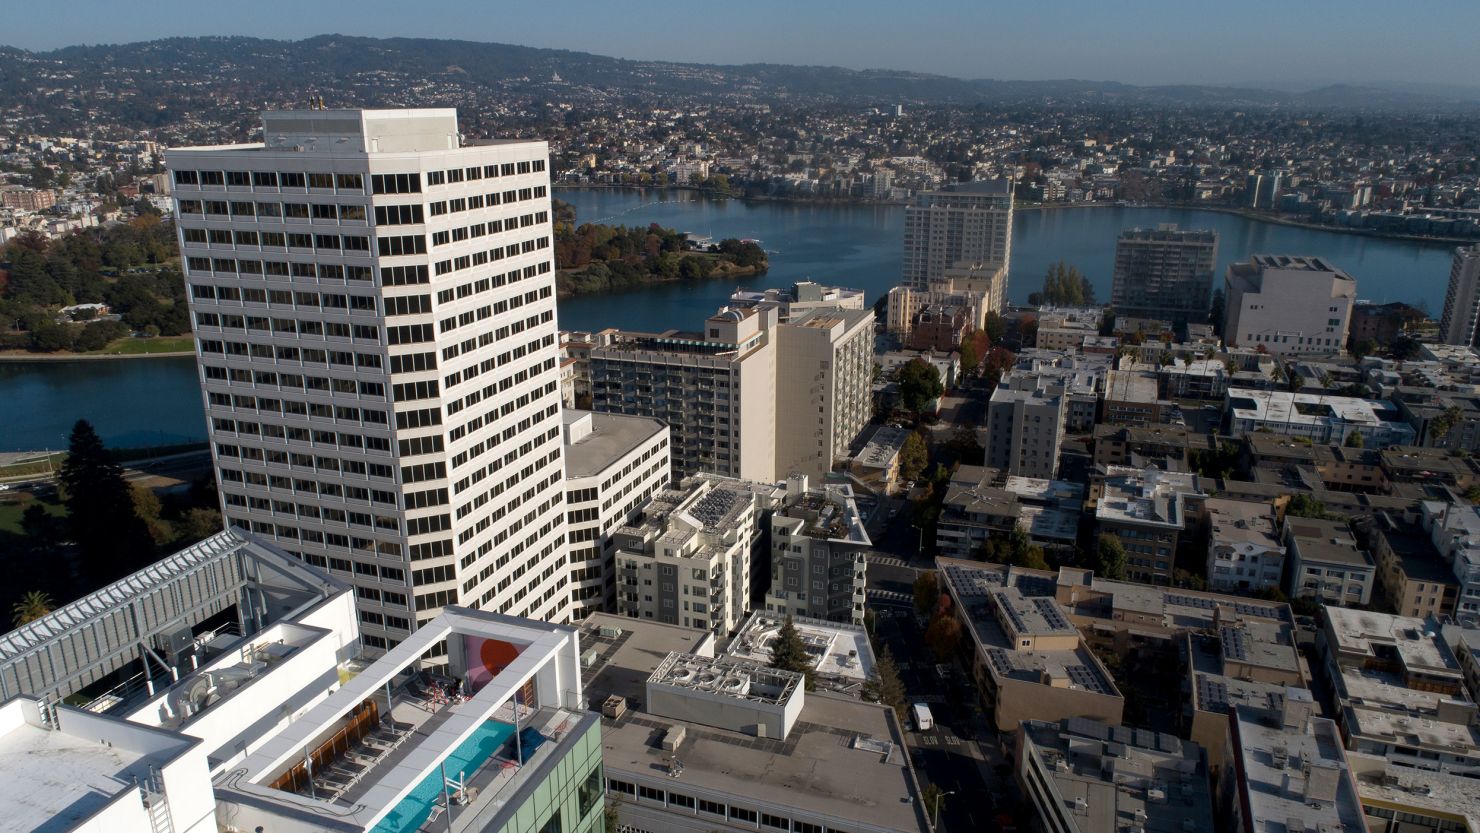 A view of downtown Oakland and Lake Merritt are seen from this drone view in 2019.